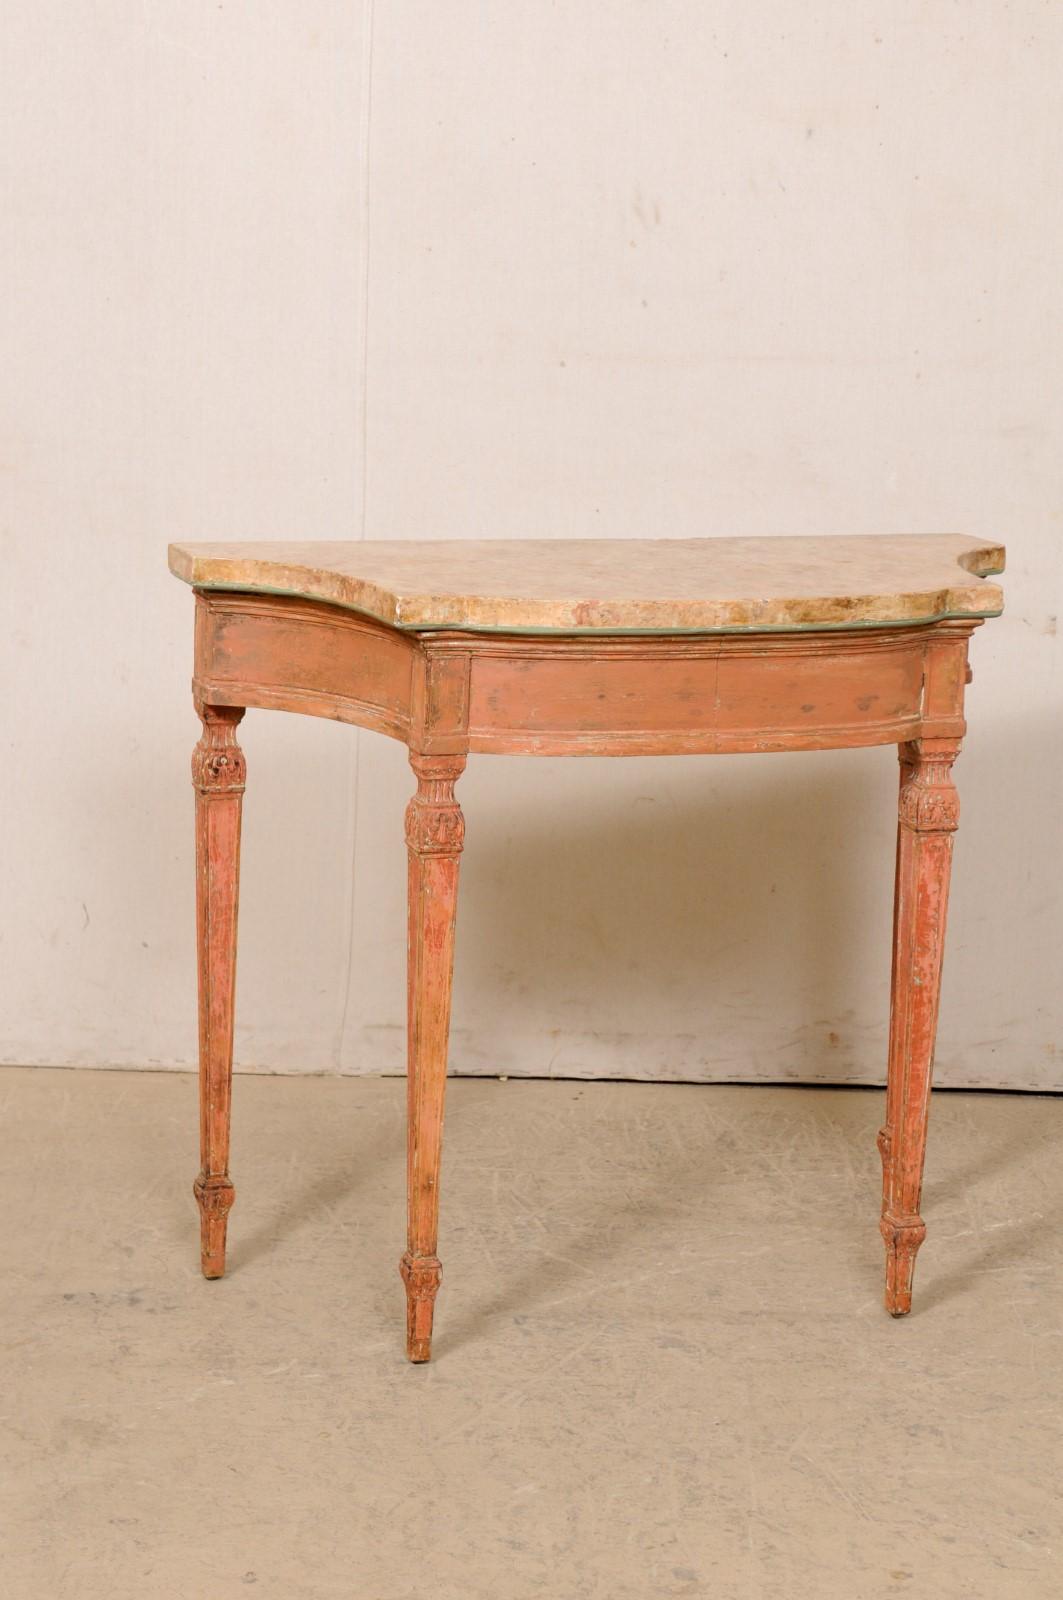 An Italian carved wood console with scagliola top from the turn of the 18th and 19th century. This antique table from Italy features a scagliola top in a lovely warm tan color palette with salmon accents, with a thin trimming of blue green outlining